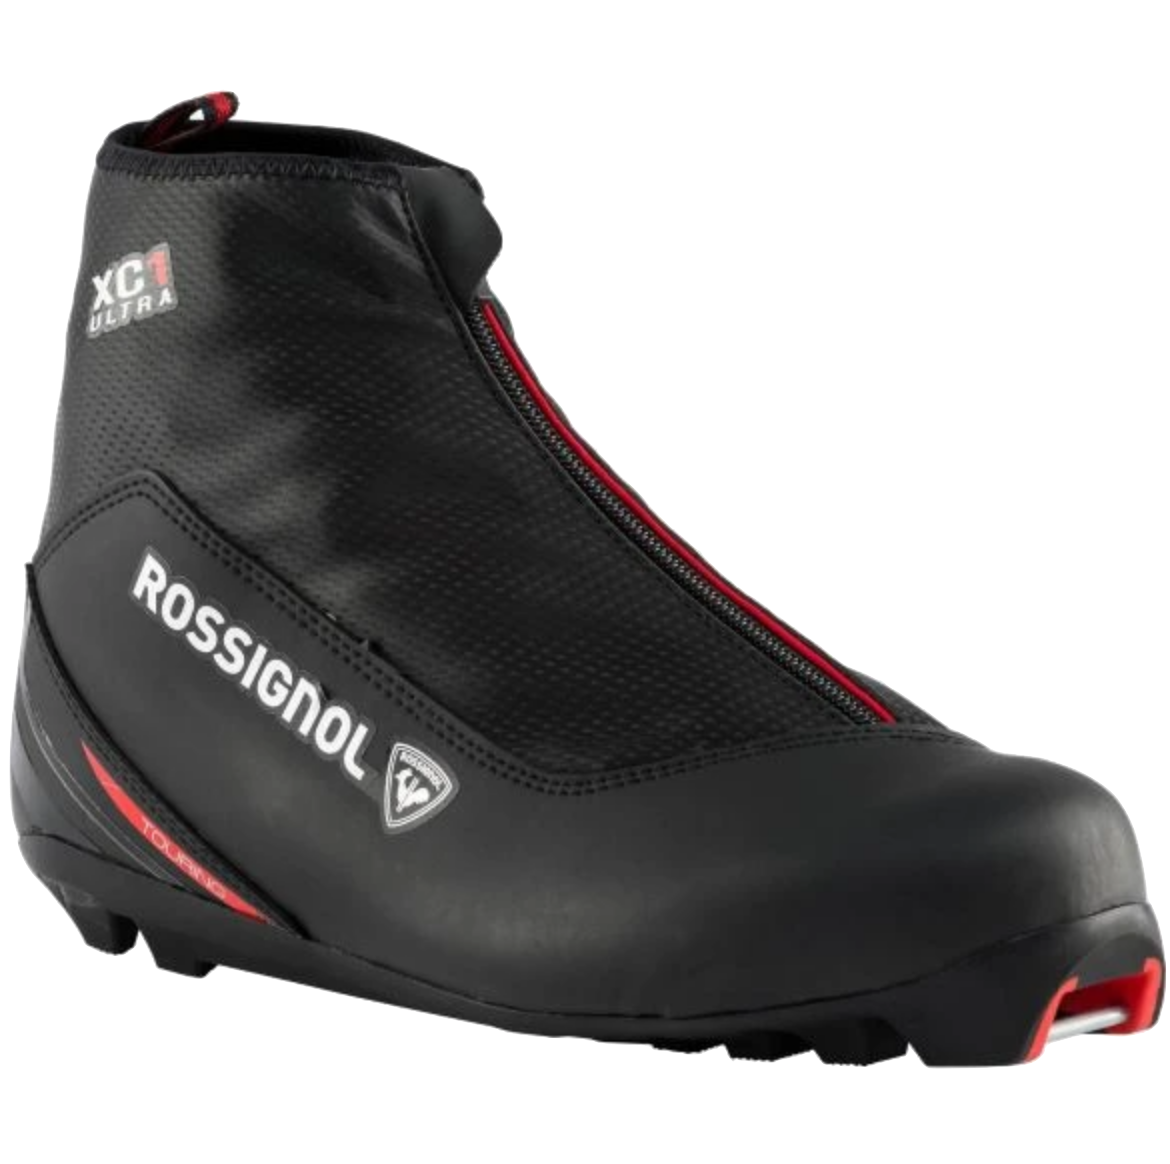 Rossignol Men's Touring Nordic Boots X-1 Ultra *SALE*